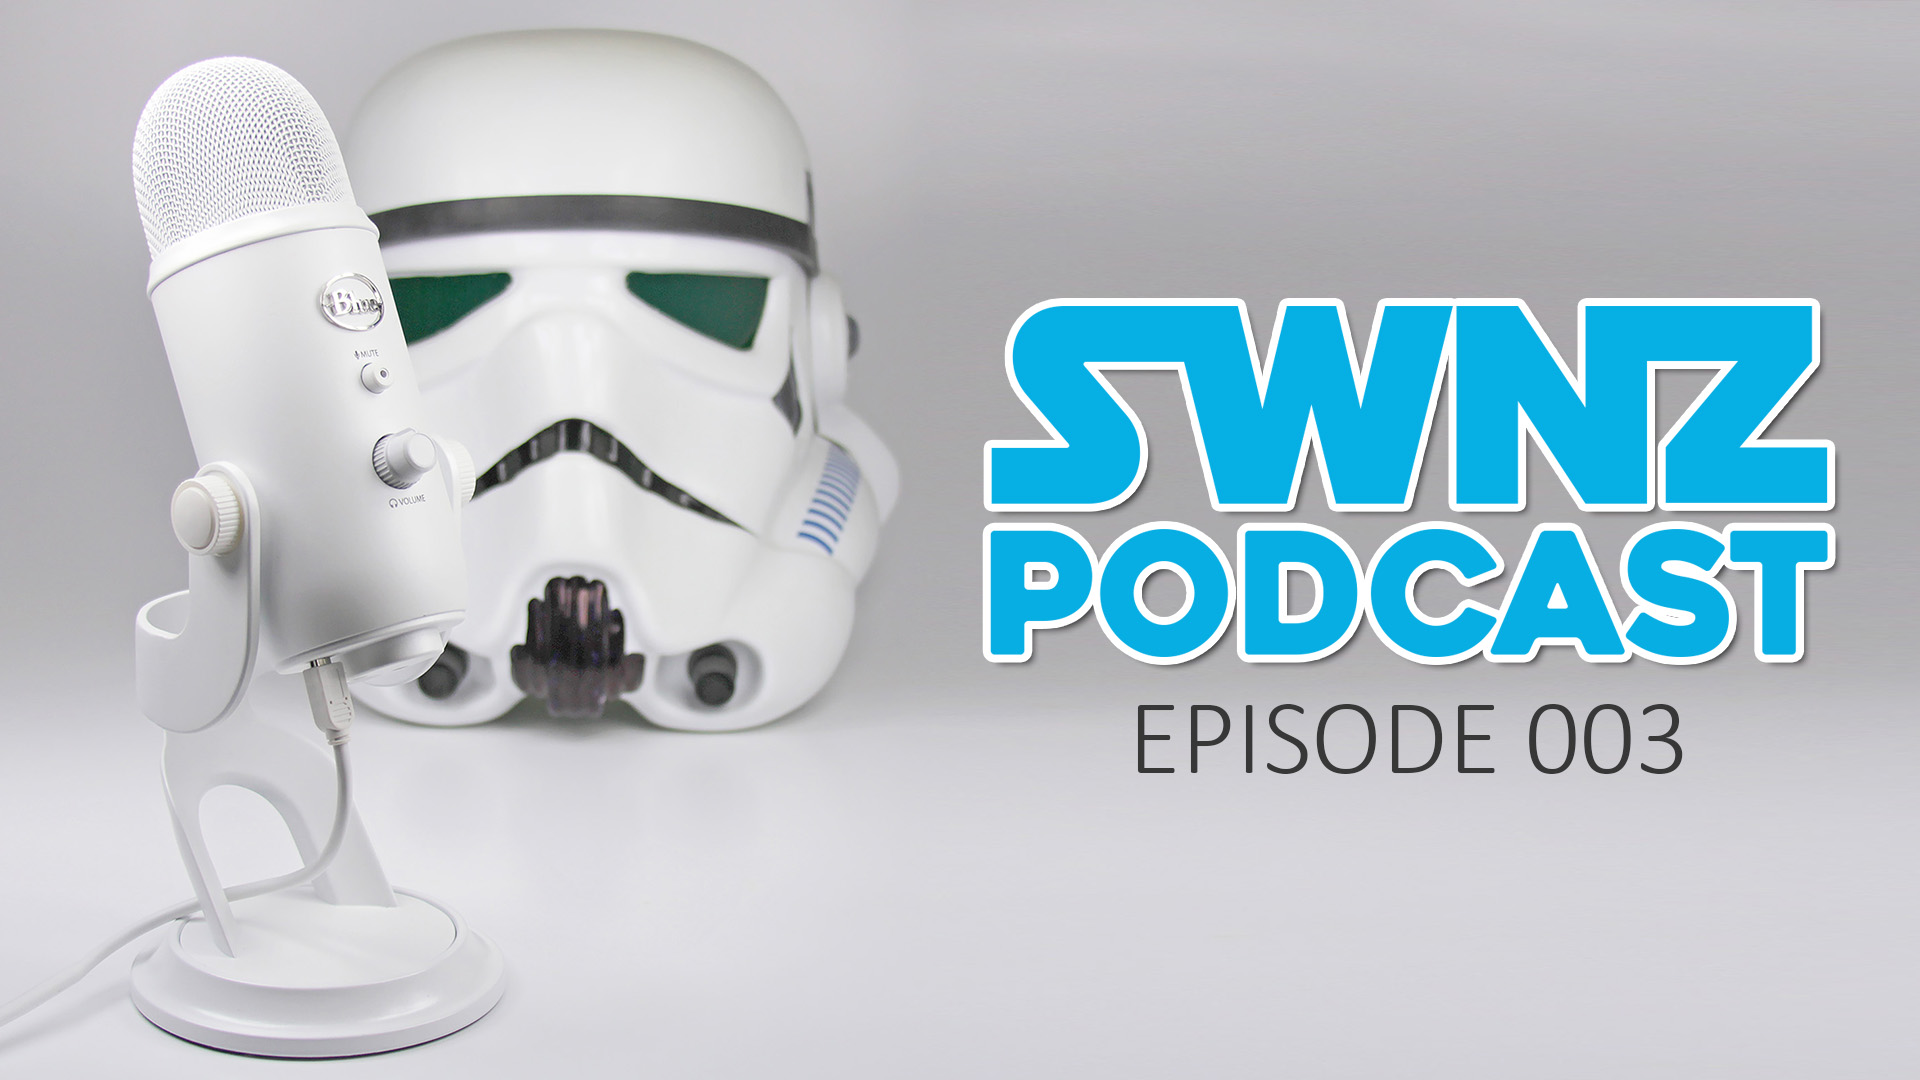 SWNZpodcast_ep003.jpg